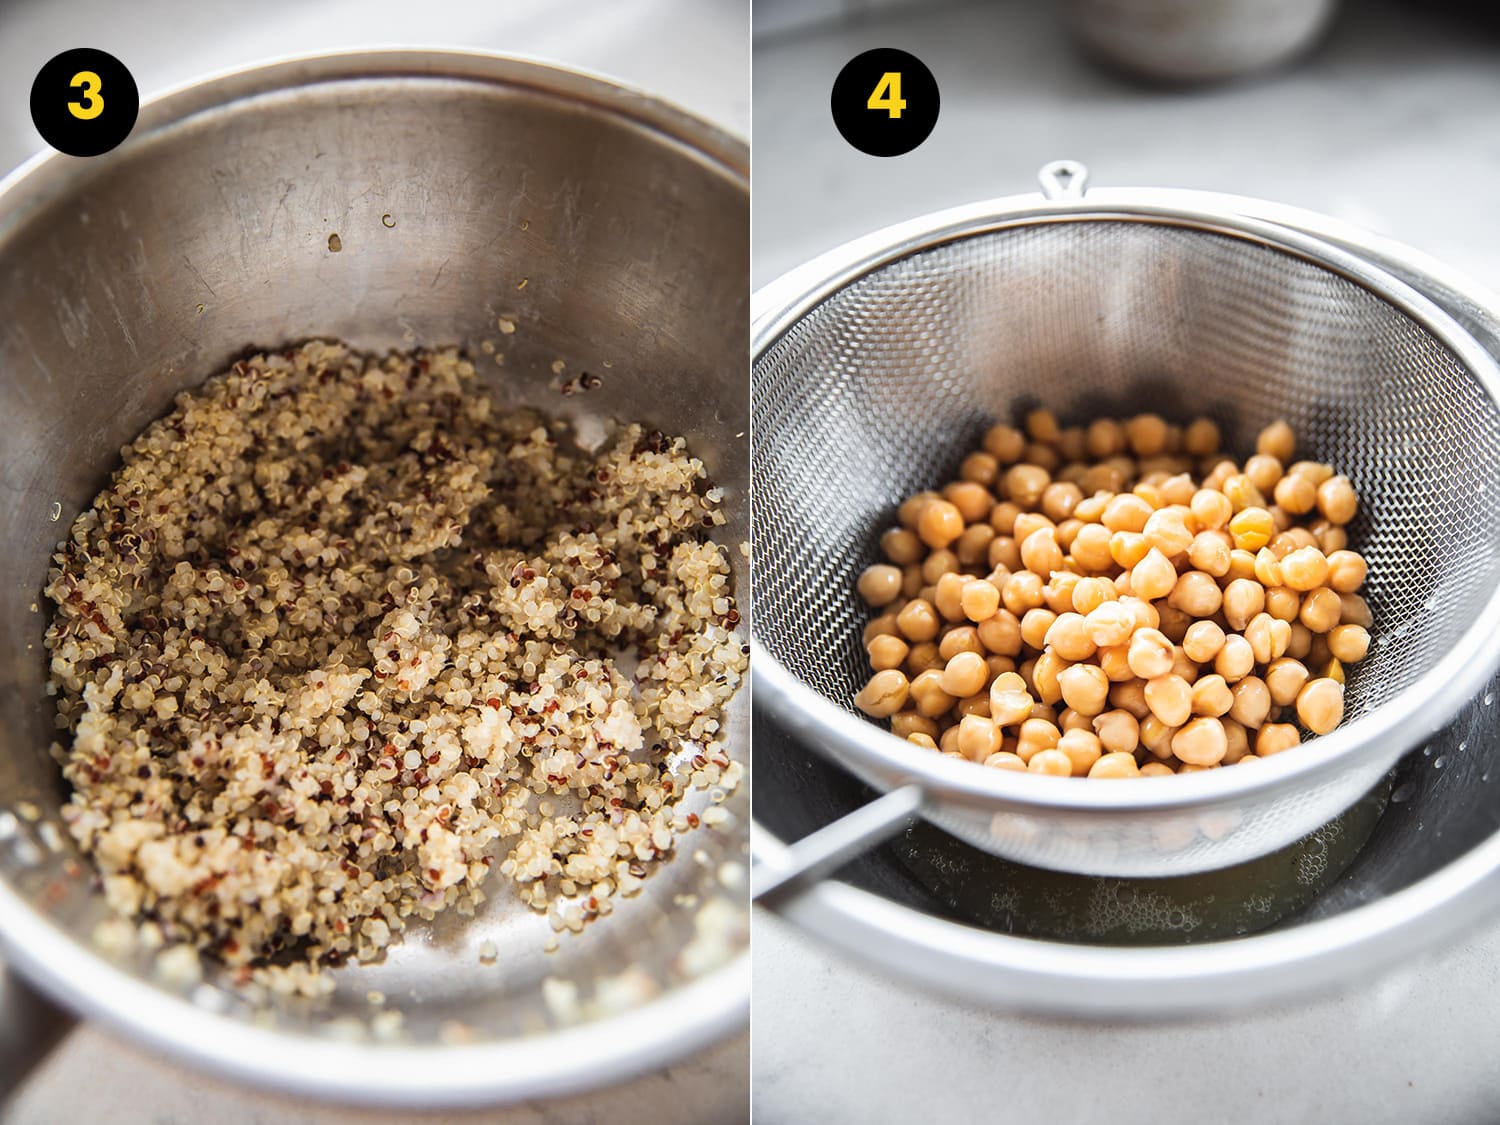 Cook quinoa in a pot and rinse and drain canned chickpeas